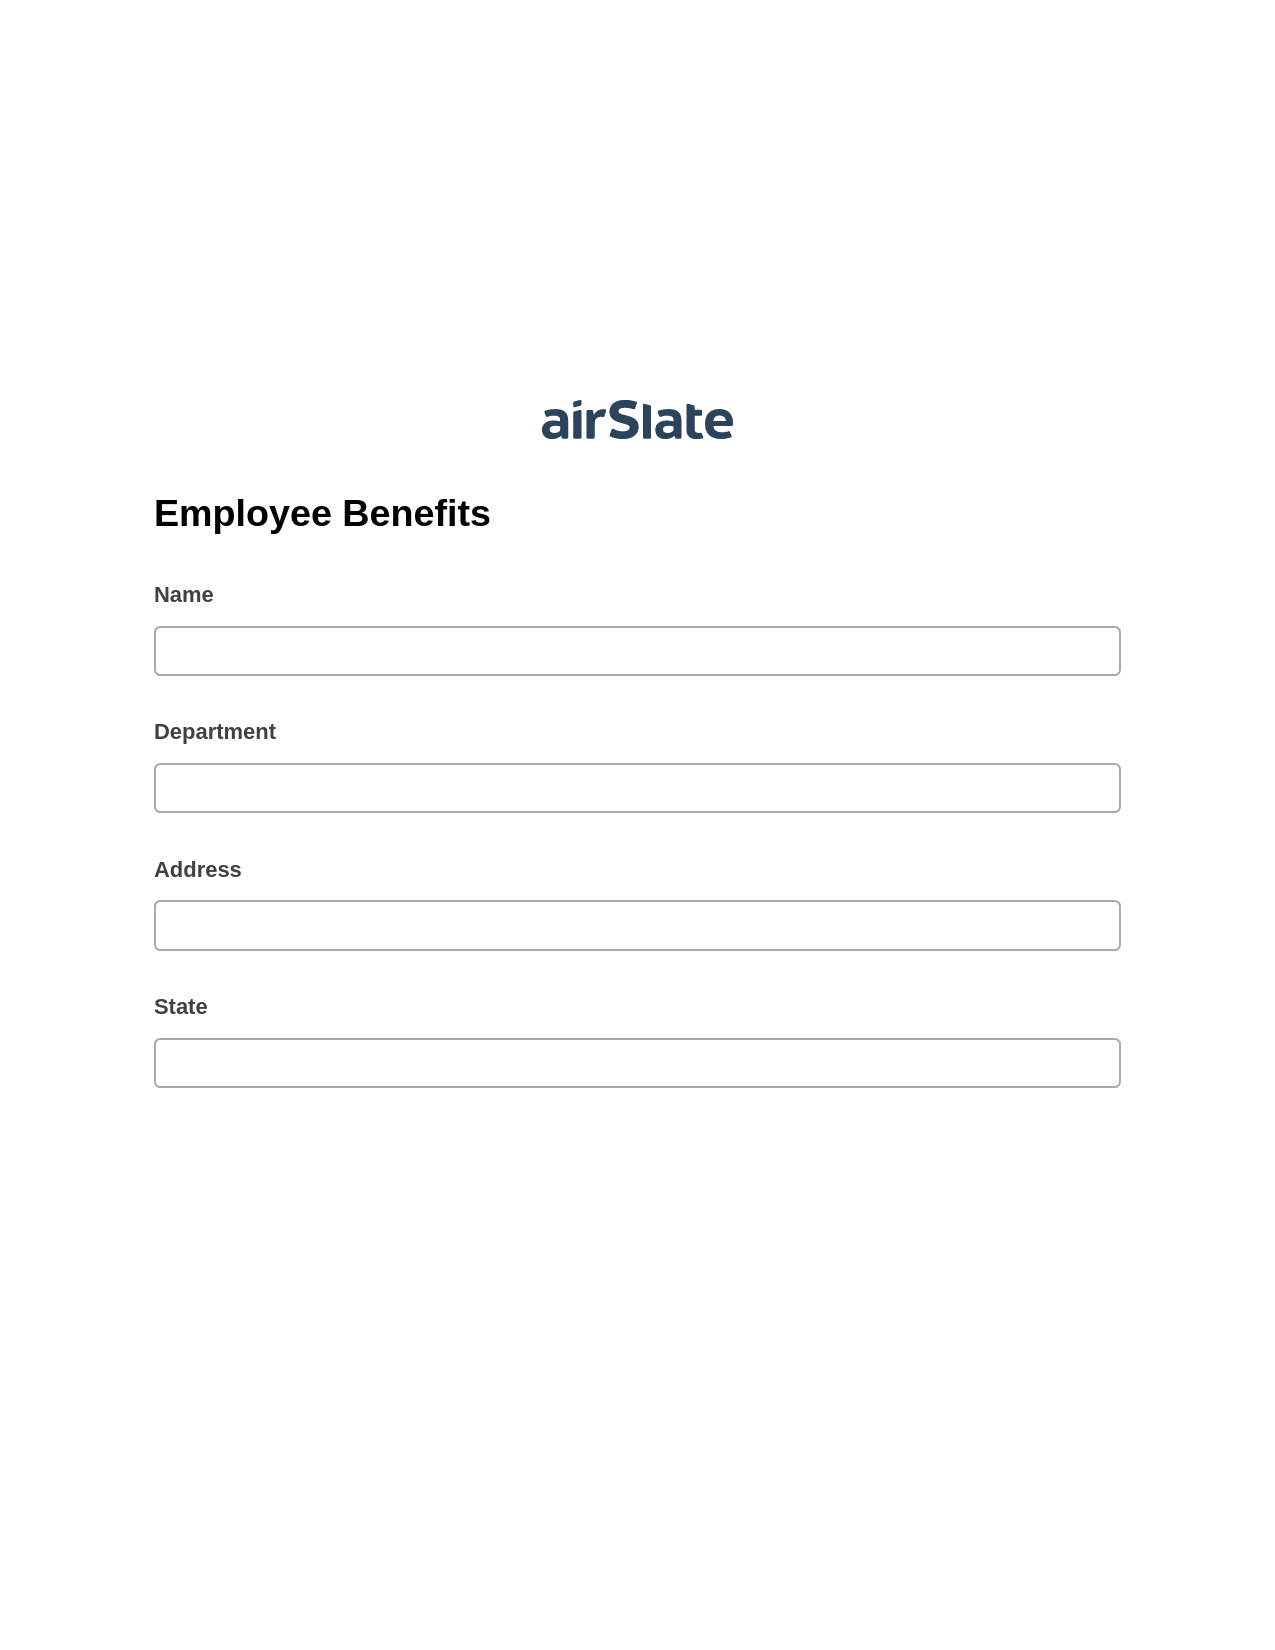 Employee Benefits Pre-fill Dropdowns from Google Sheet Bot, Update NetSuite Records Bot, Archive to SharePoint Folder Bot